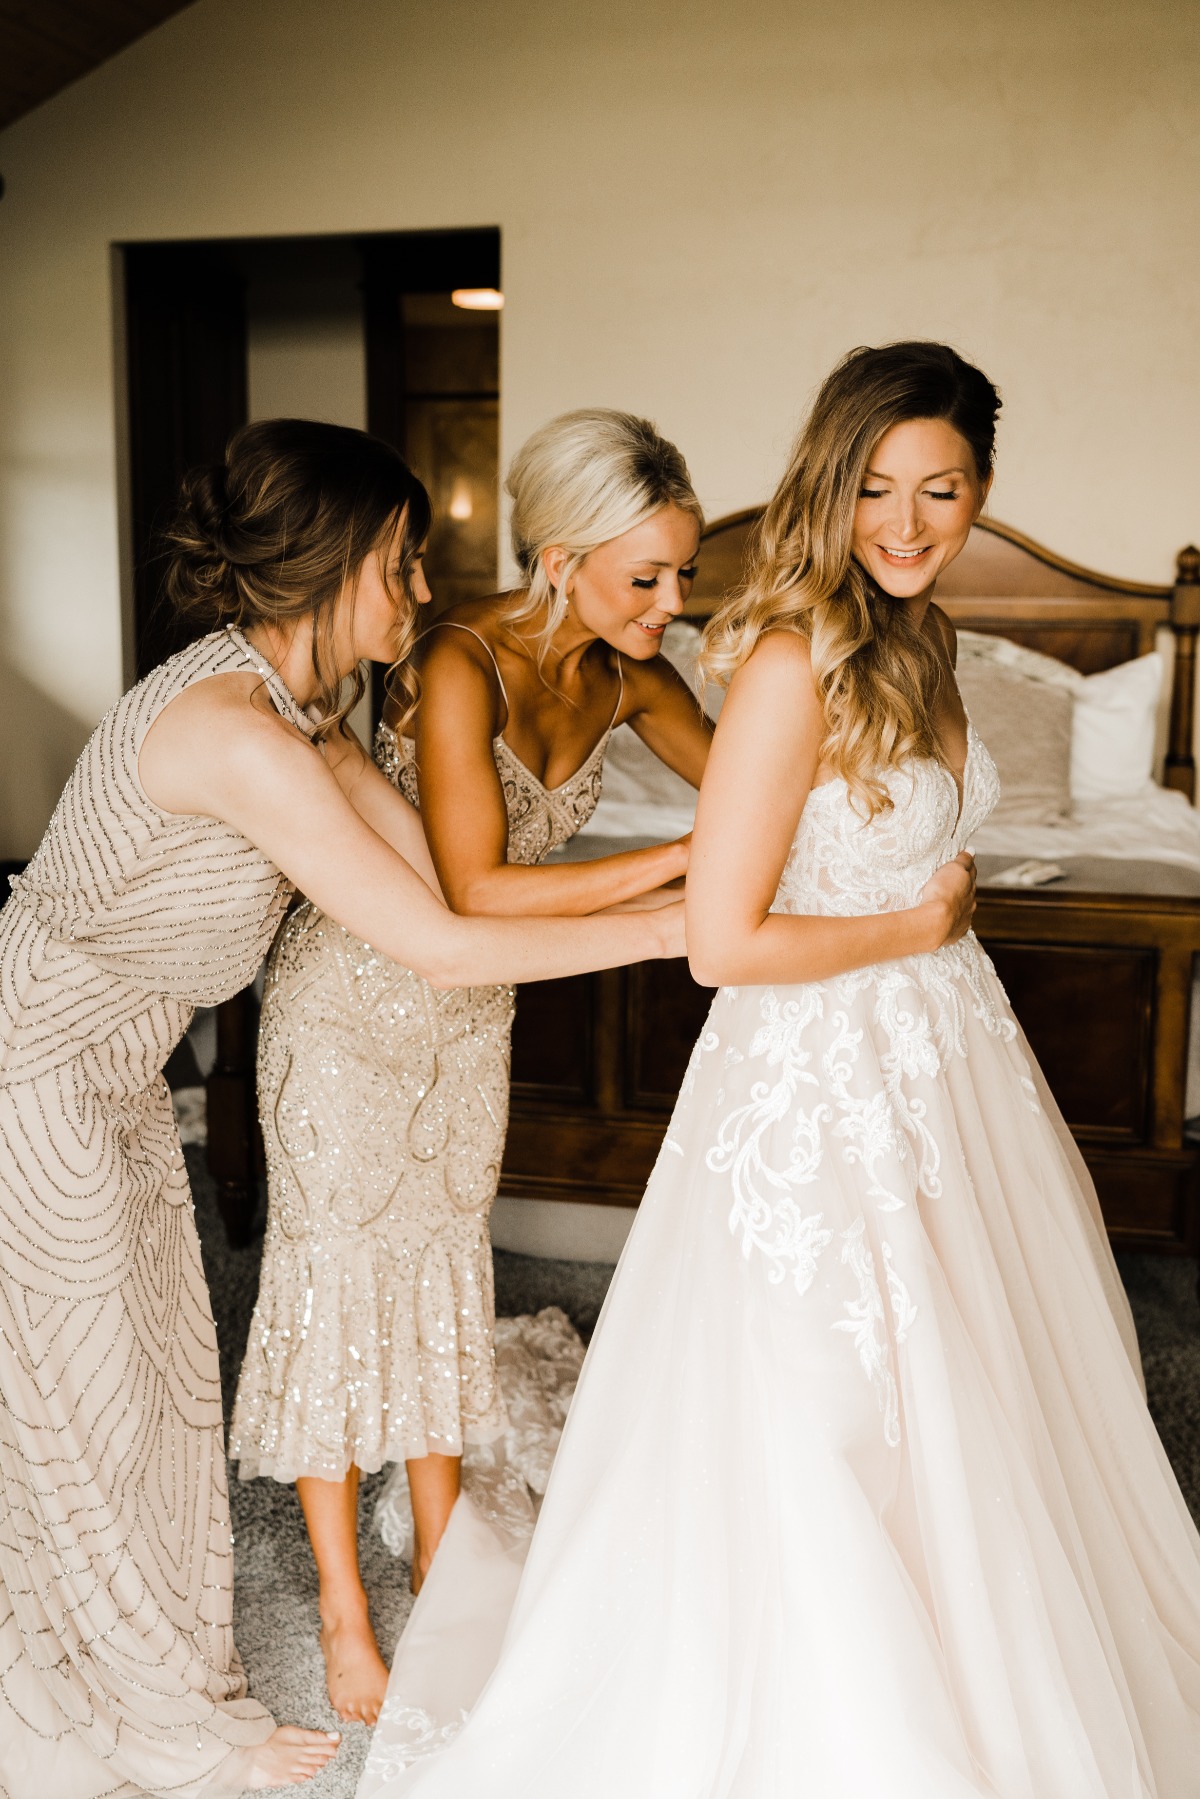 getting ready pose ideas with bridal party